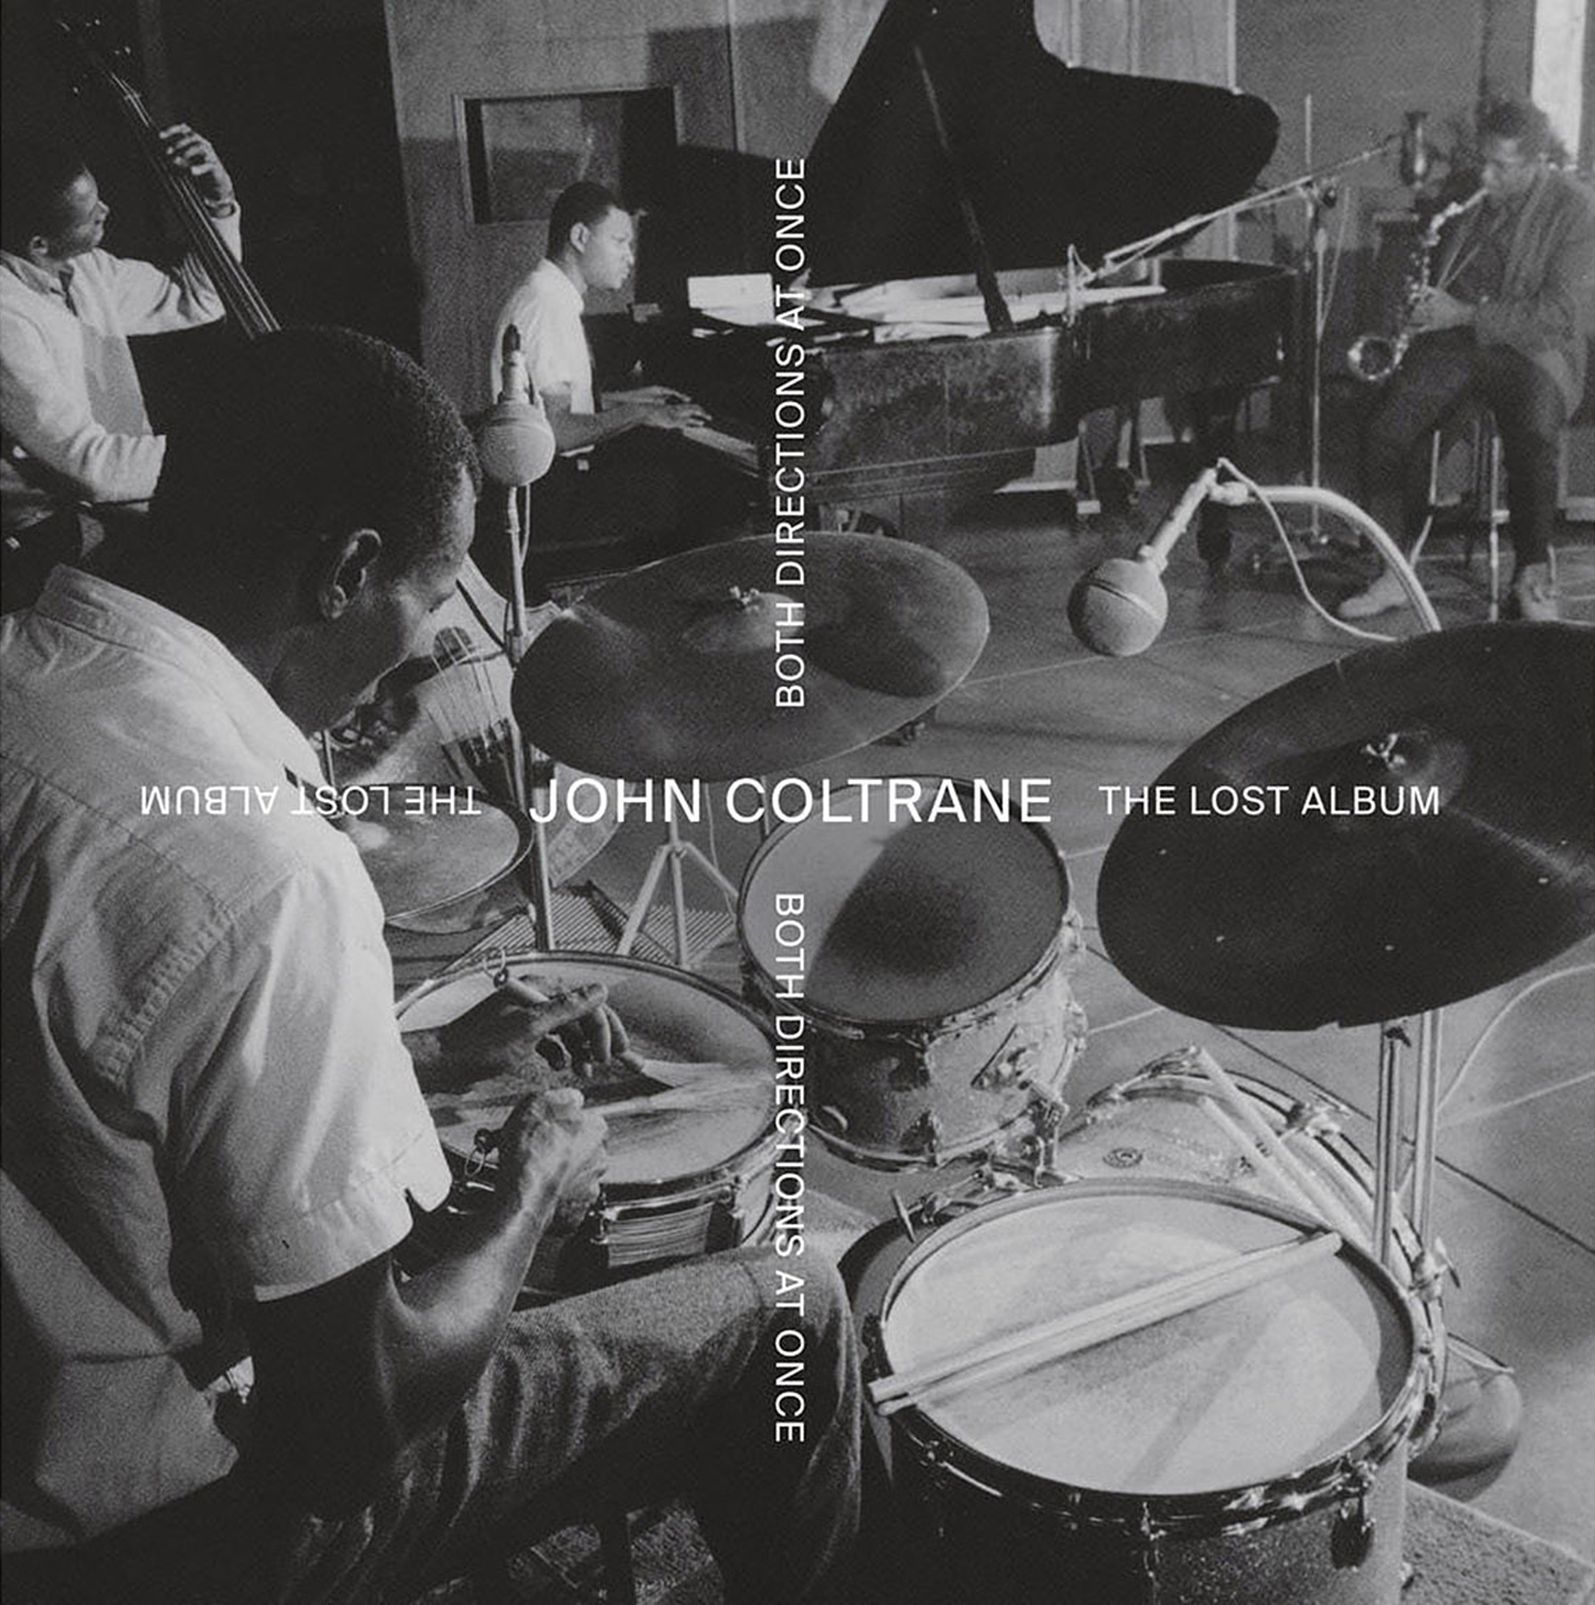 John Coltrane: Both Directions At Once: The Lost Album